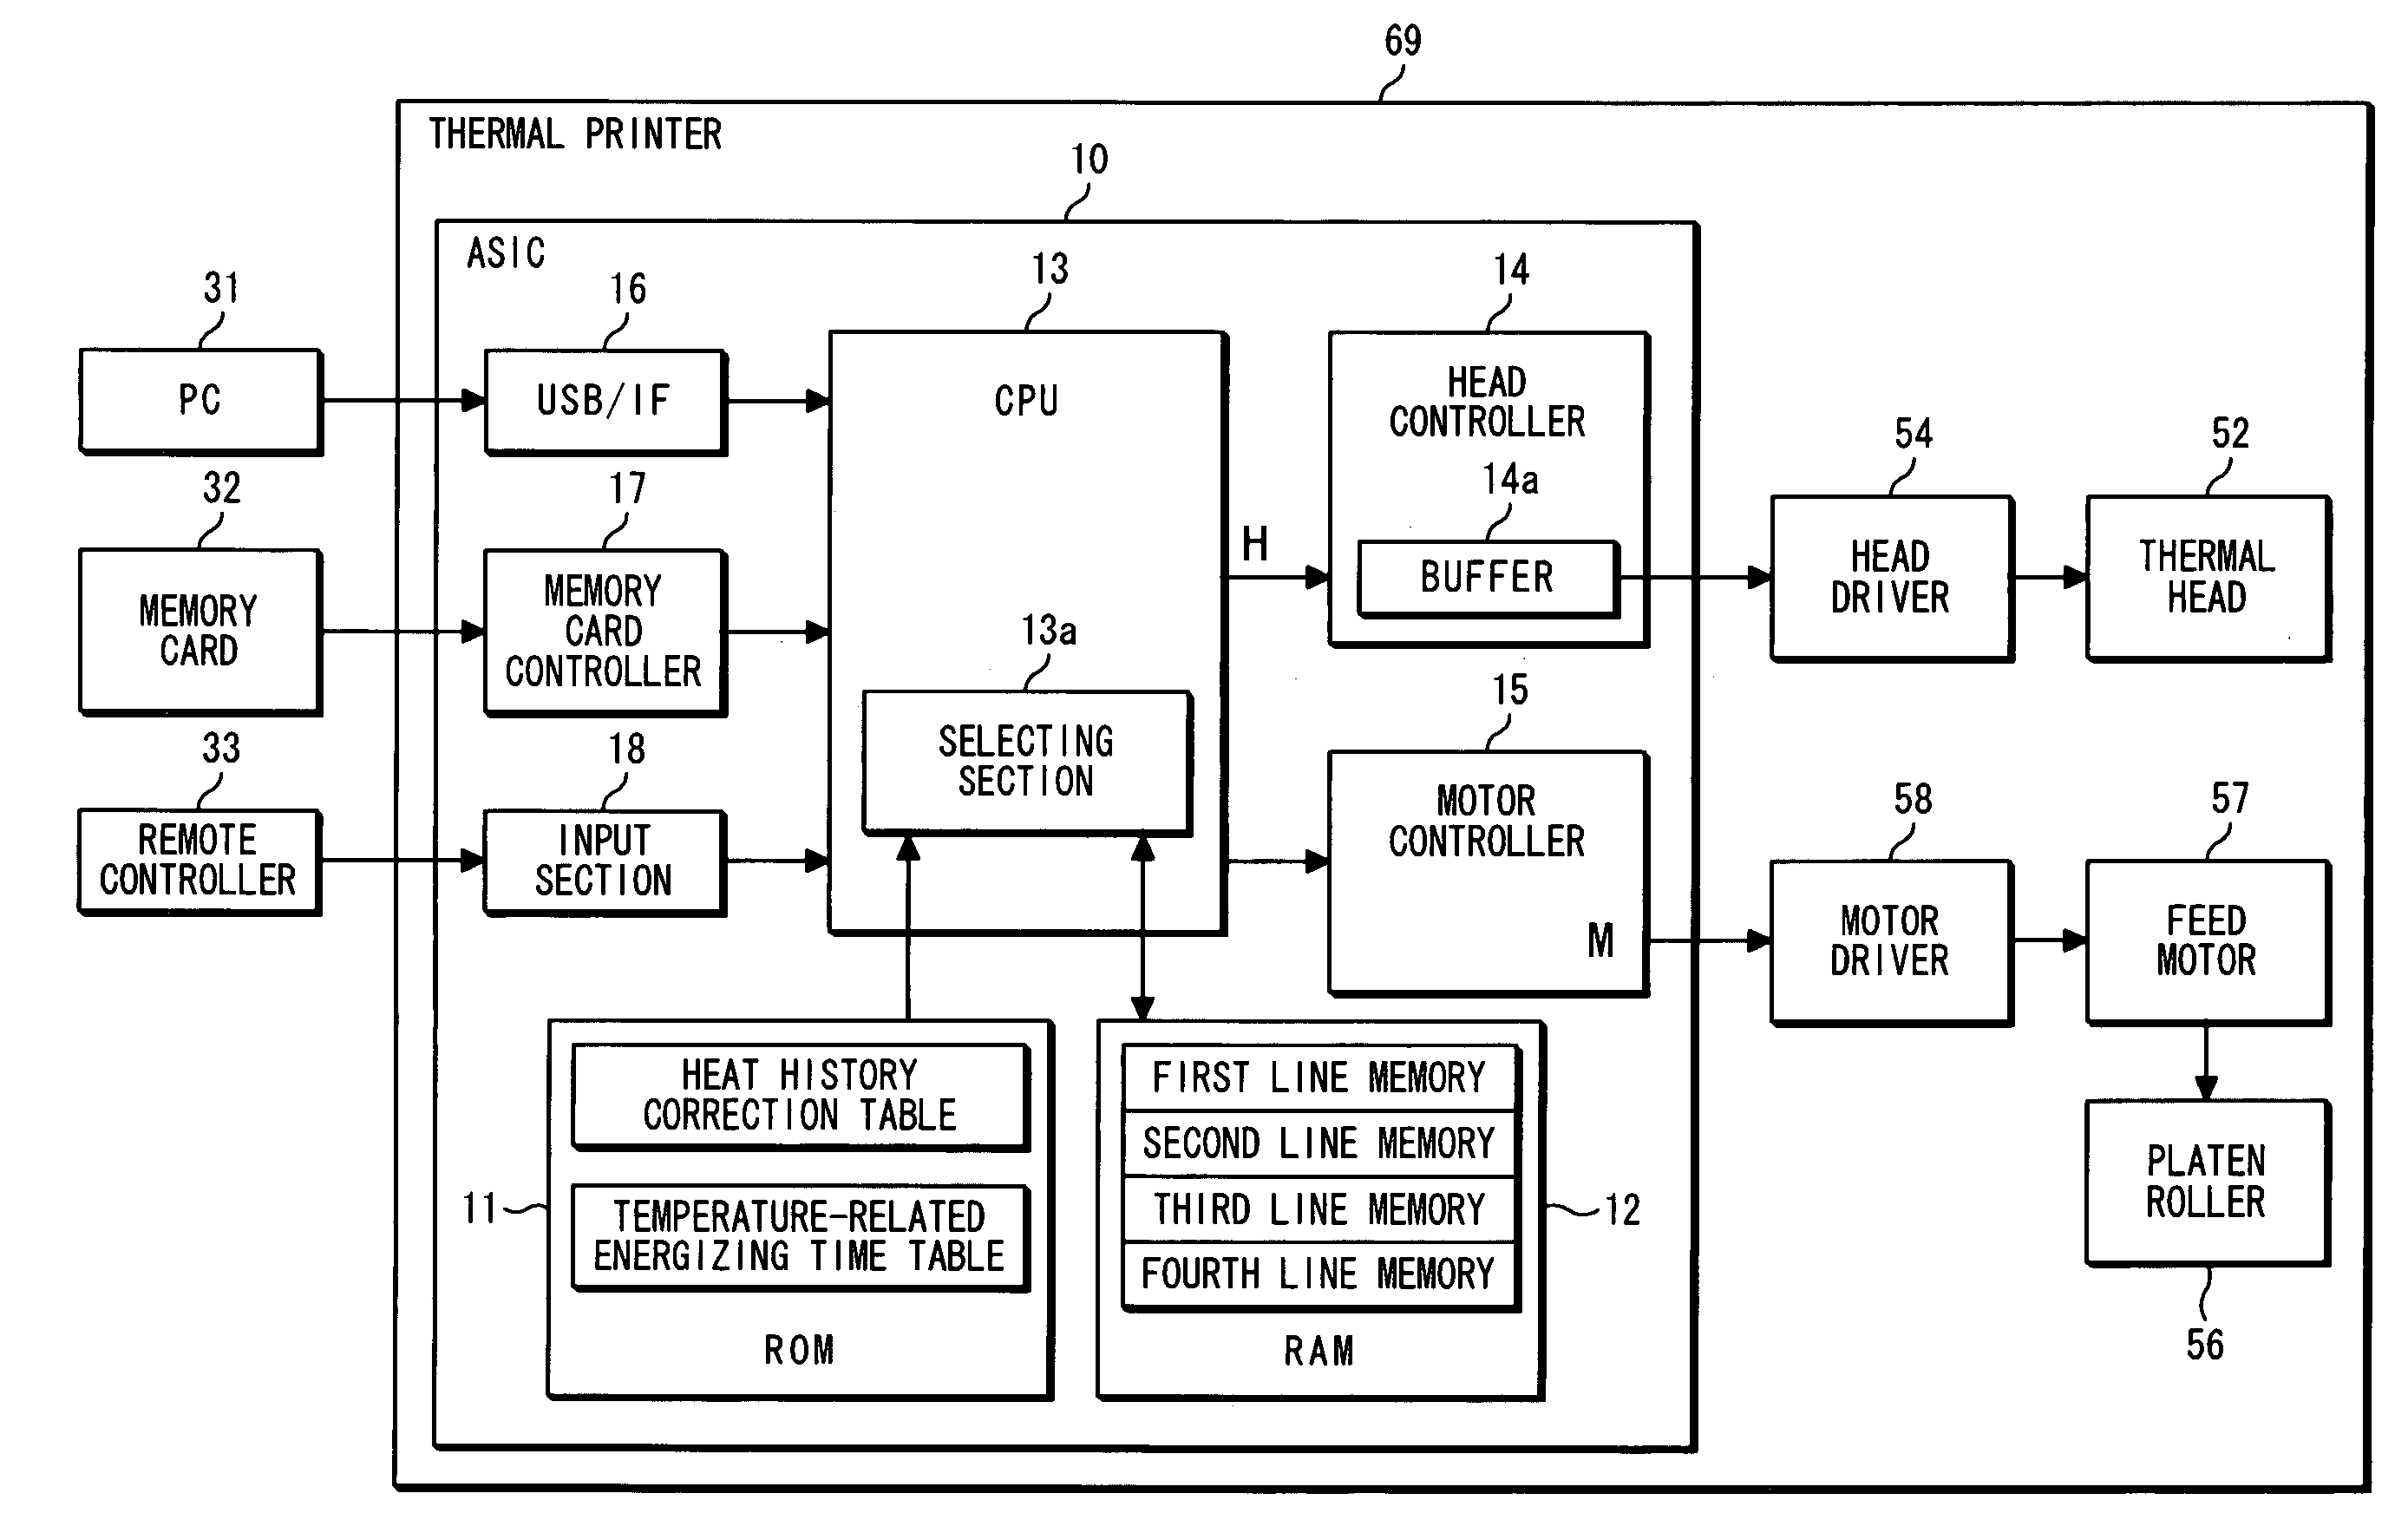 Thermal printer and method for correcting the energizing time data for heating elements in the thermal printer